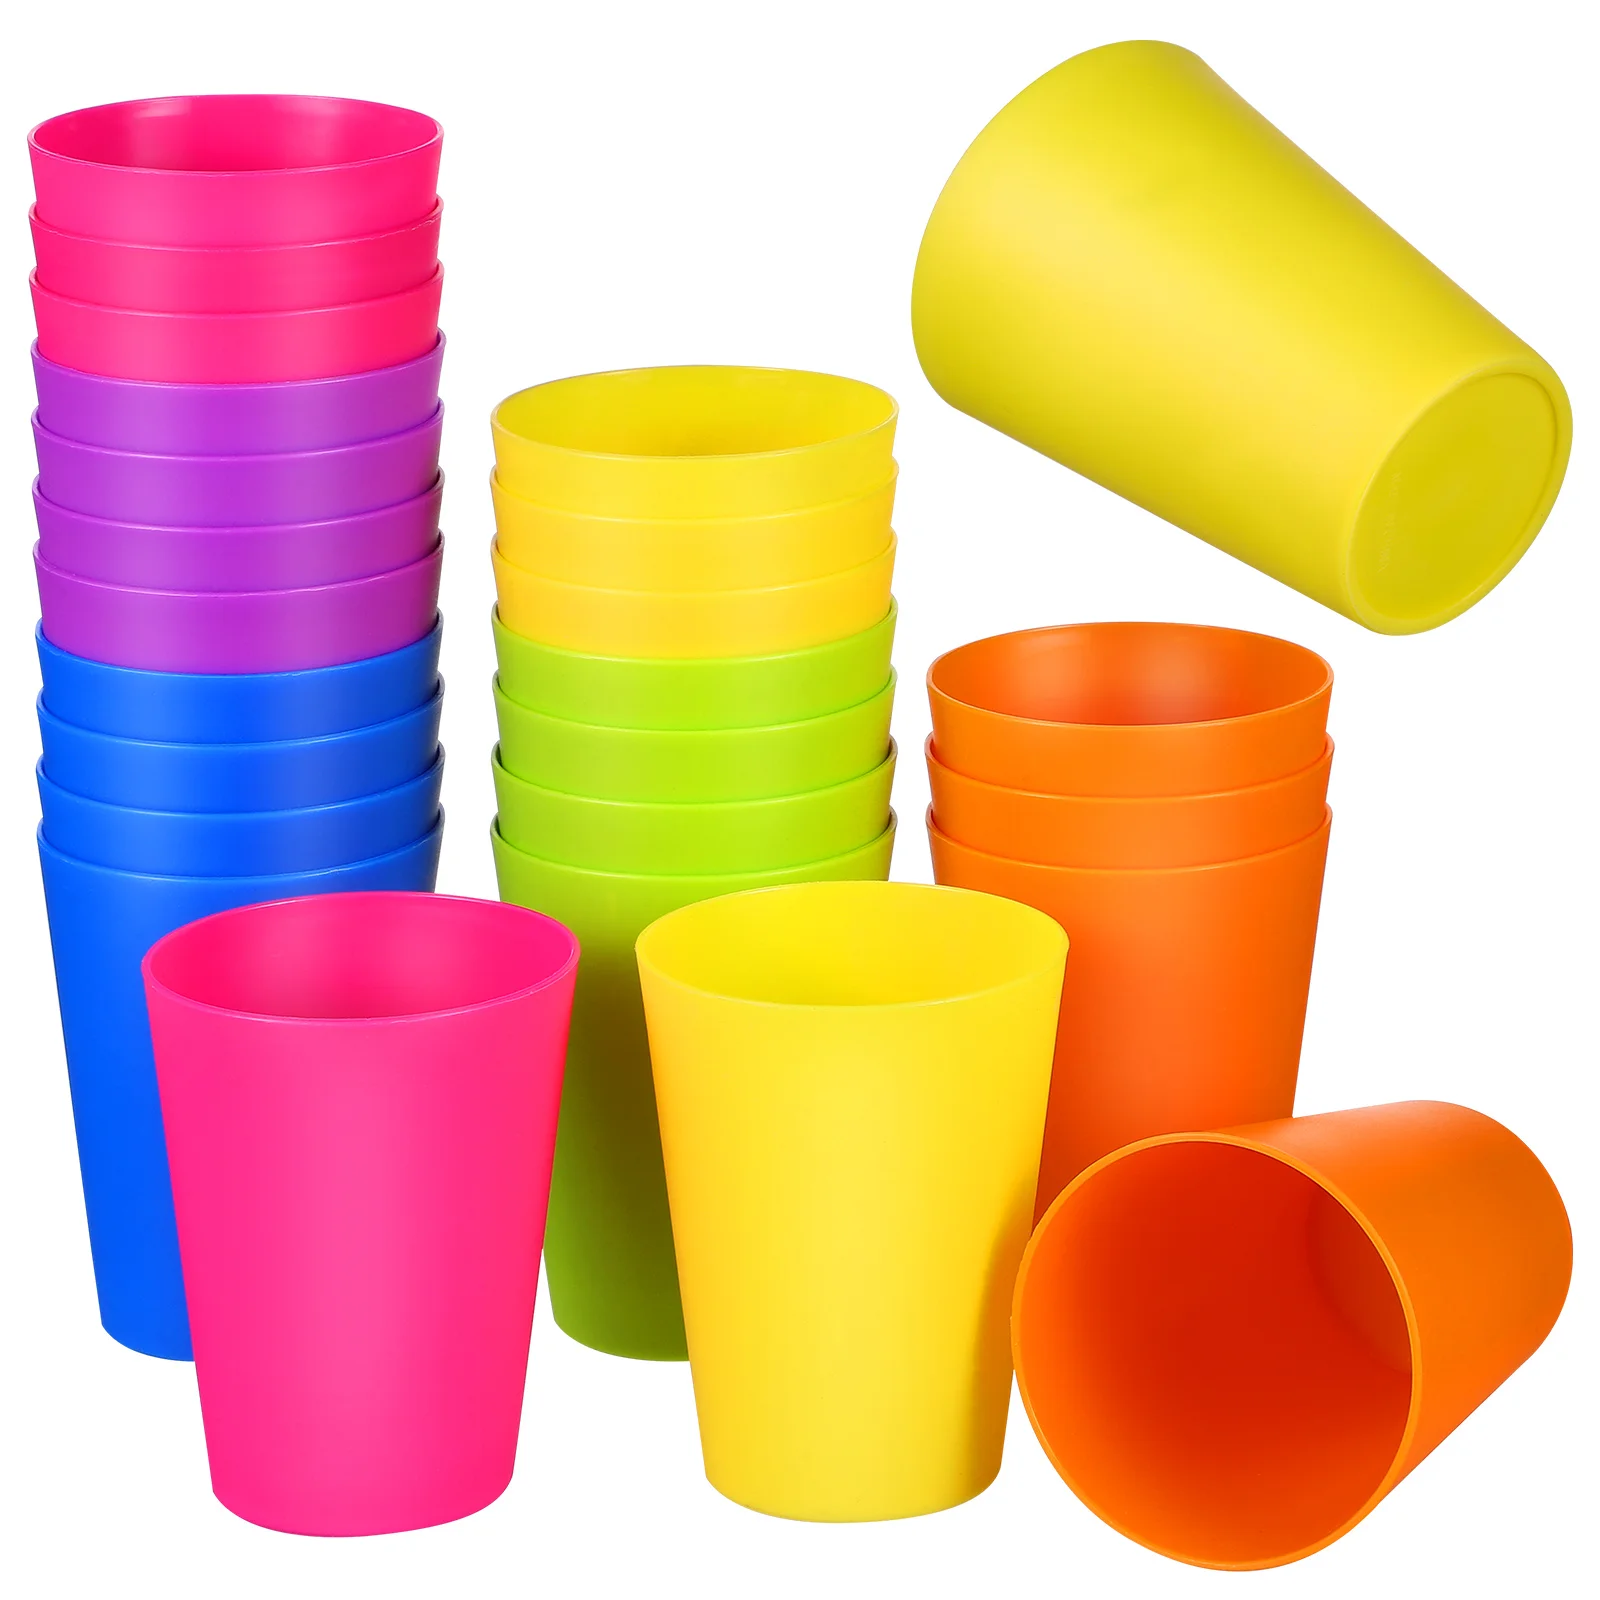 

24 Pcs Safe Lightweight Stackable Reusable Bear Cups Plastic Drinking Cups Beverage Cups